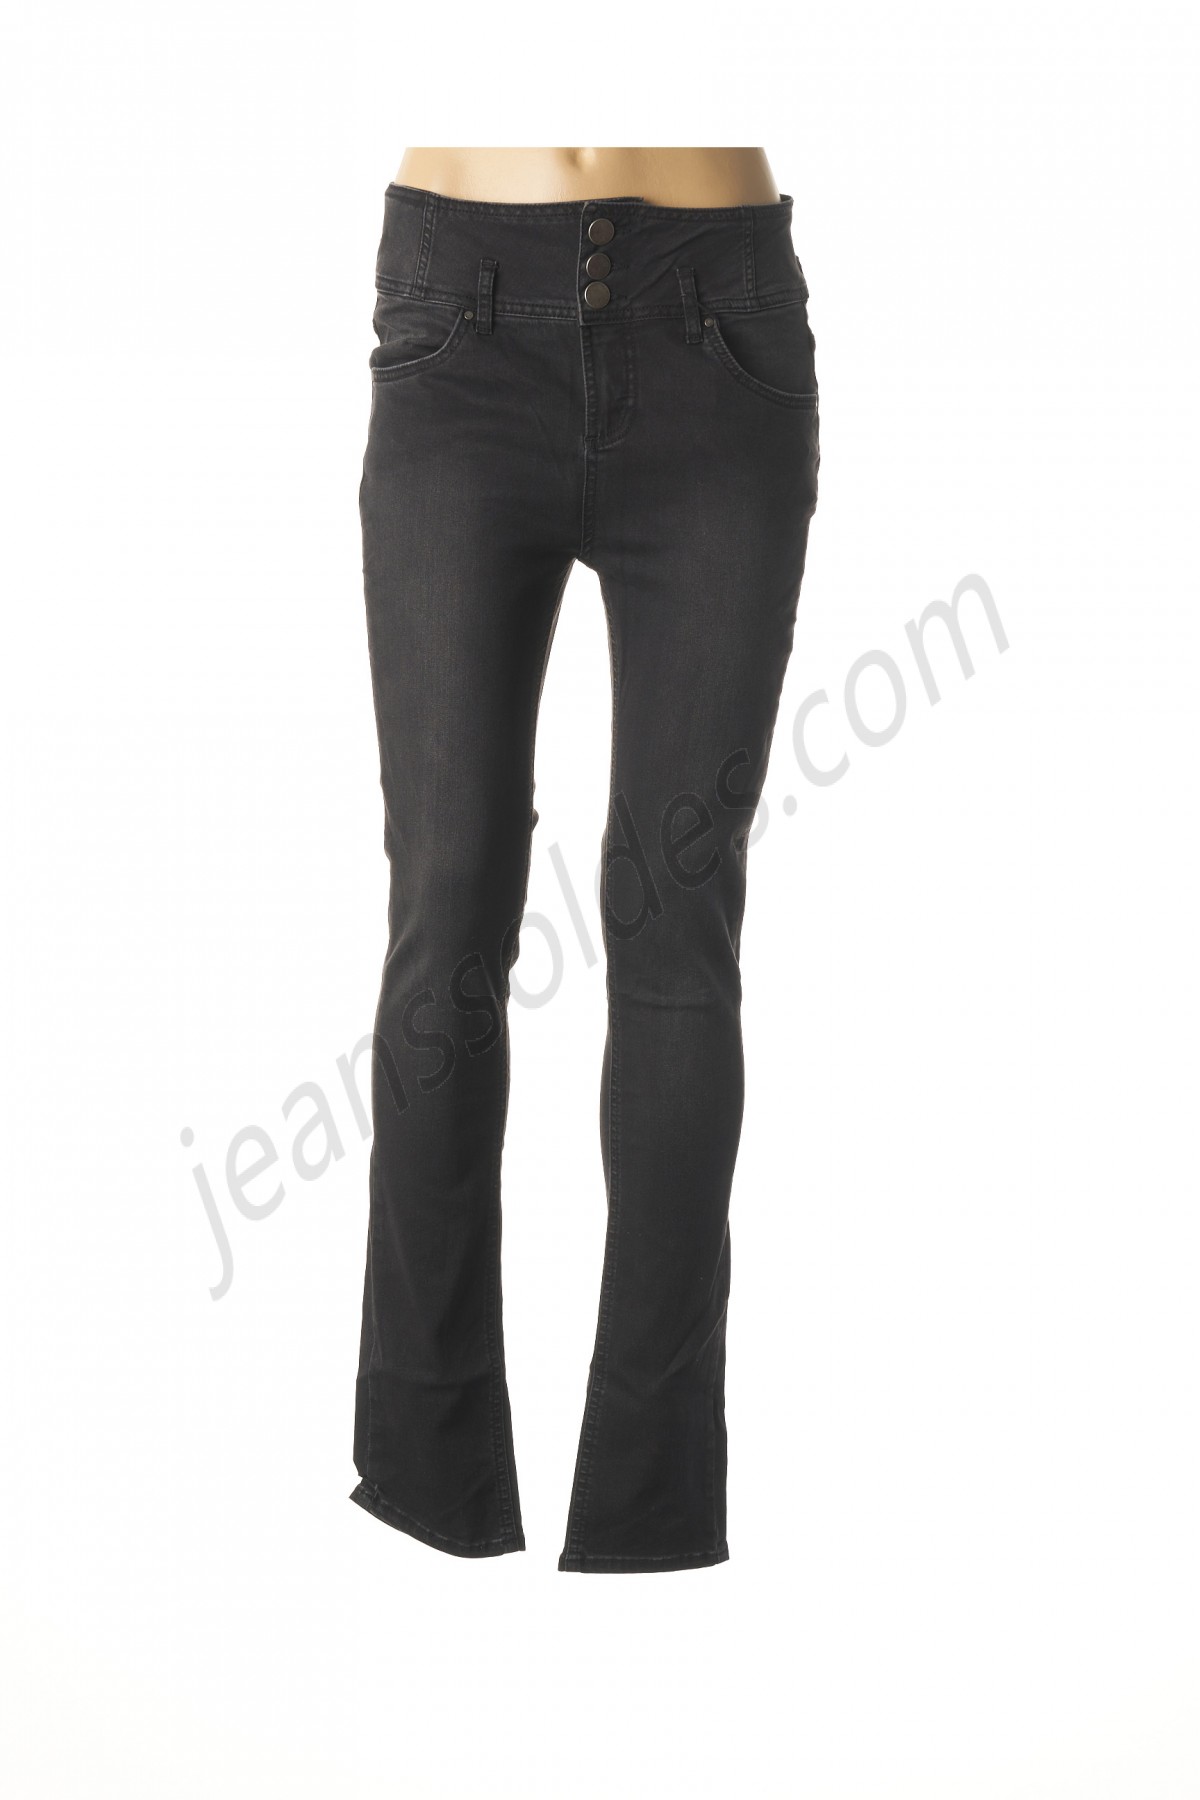 b.young-Jeans coupe slim prix d’amis - -0